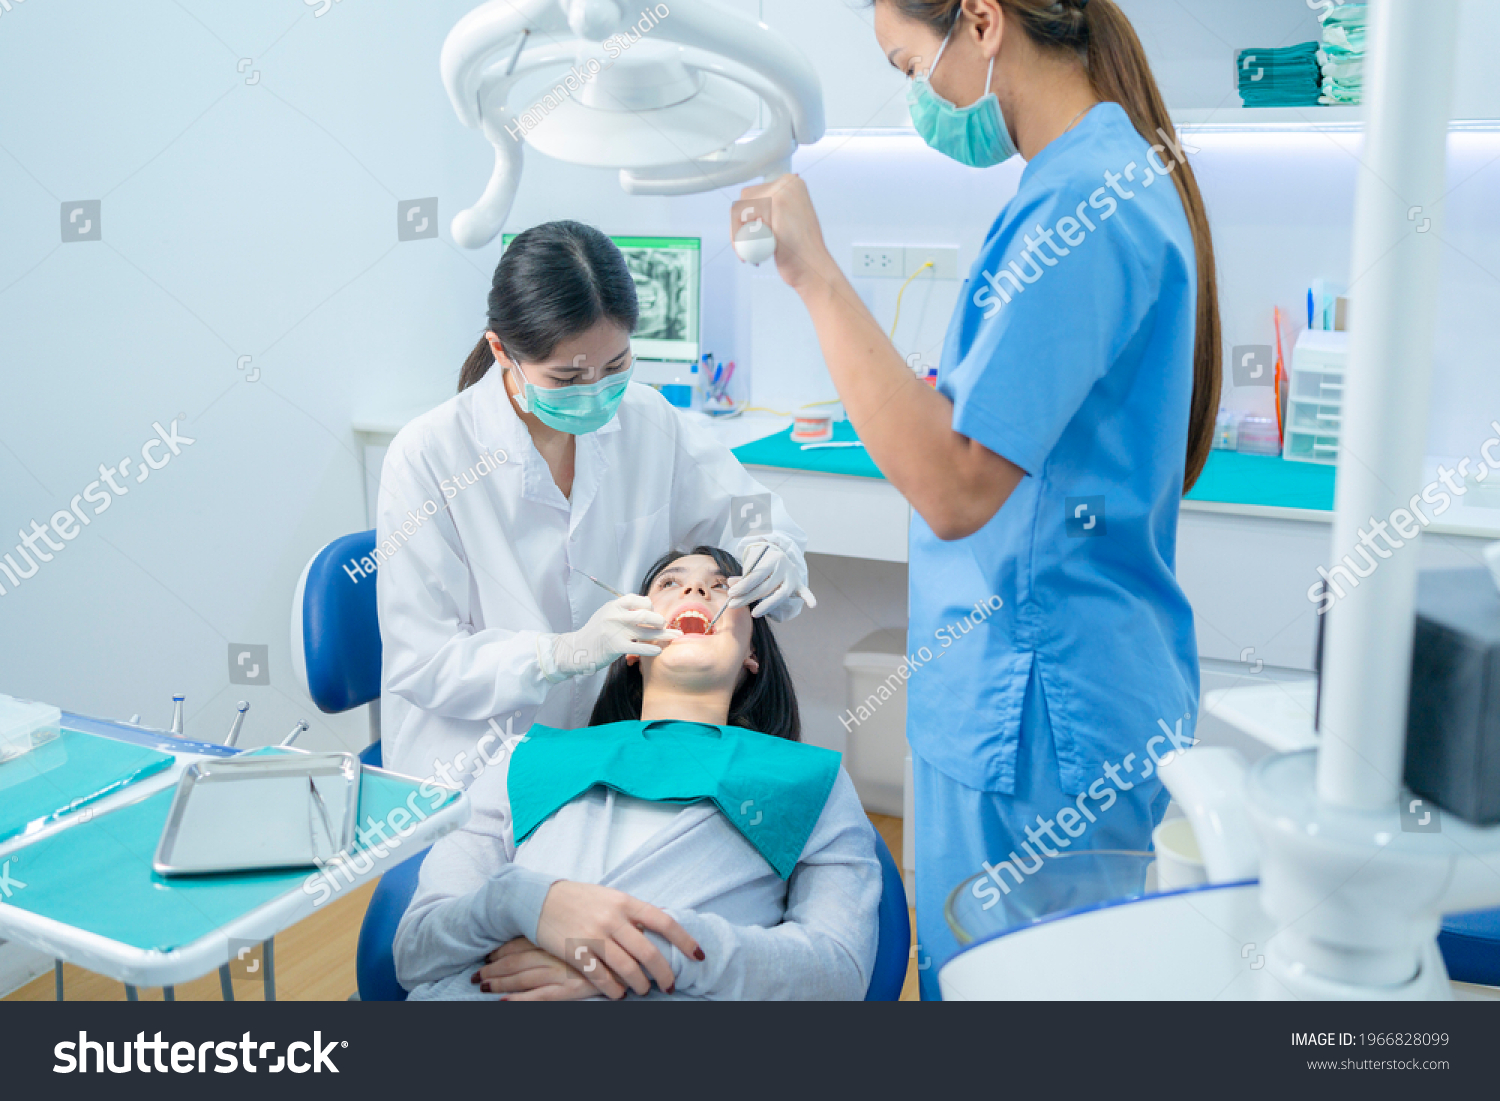 Asian female dentist adjust dental surgical light then starts checking or examining tooth of young girl patient lying on dental chair. Dental assistant support by handing instruments at dental clinic. #1966828099